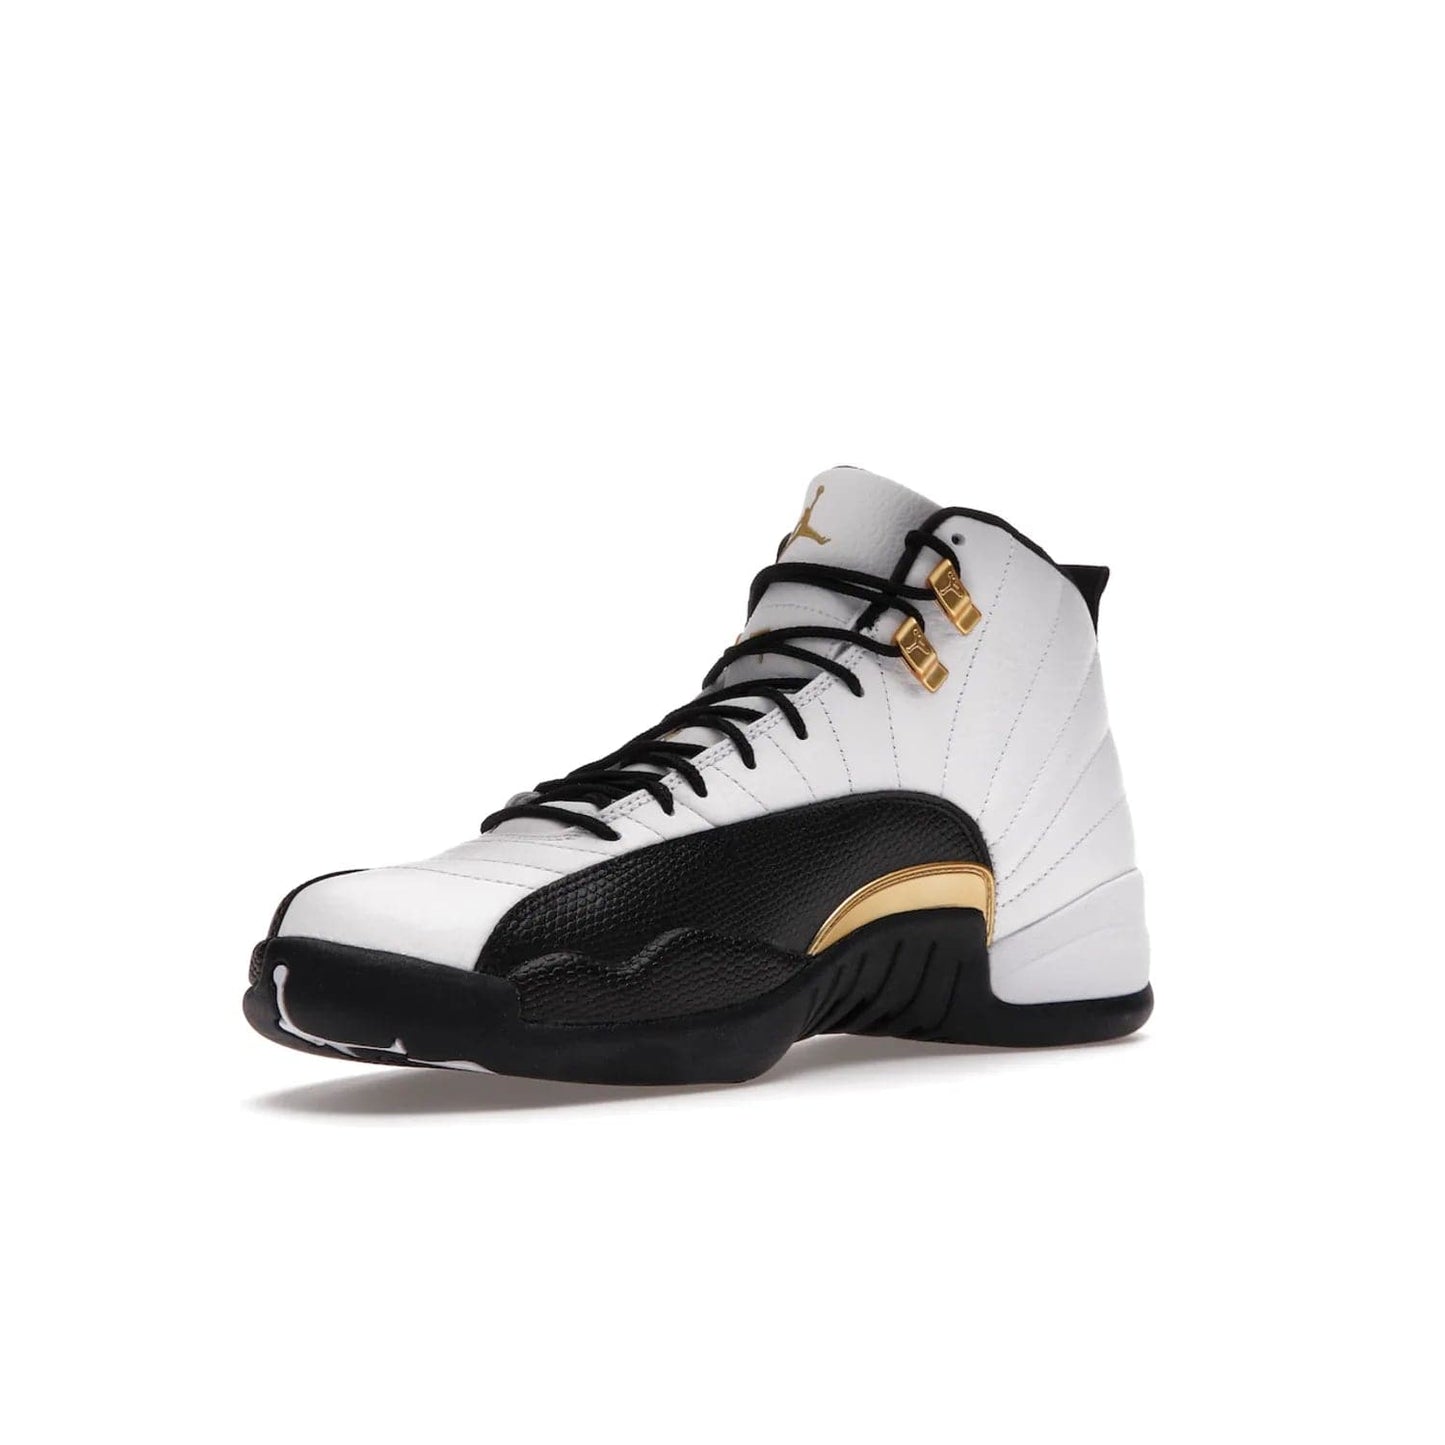 Jordan 12 Retro Royalty Taxi - Image 15 - Only at www.BallersClubKickz.com - Make a statement with the Air Jordan 12 Retro Royalty Taxi. Woven heel tag, gold plaquet, white tumbled leather upper plus a black toe wrap, make this modern take on the classic a must-have. Available in November 2021.